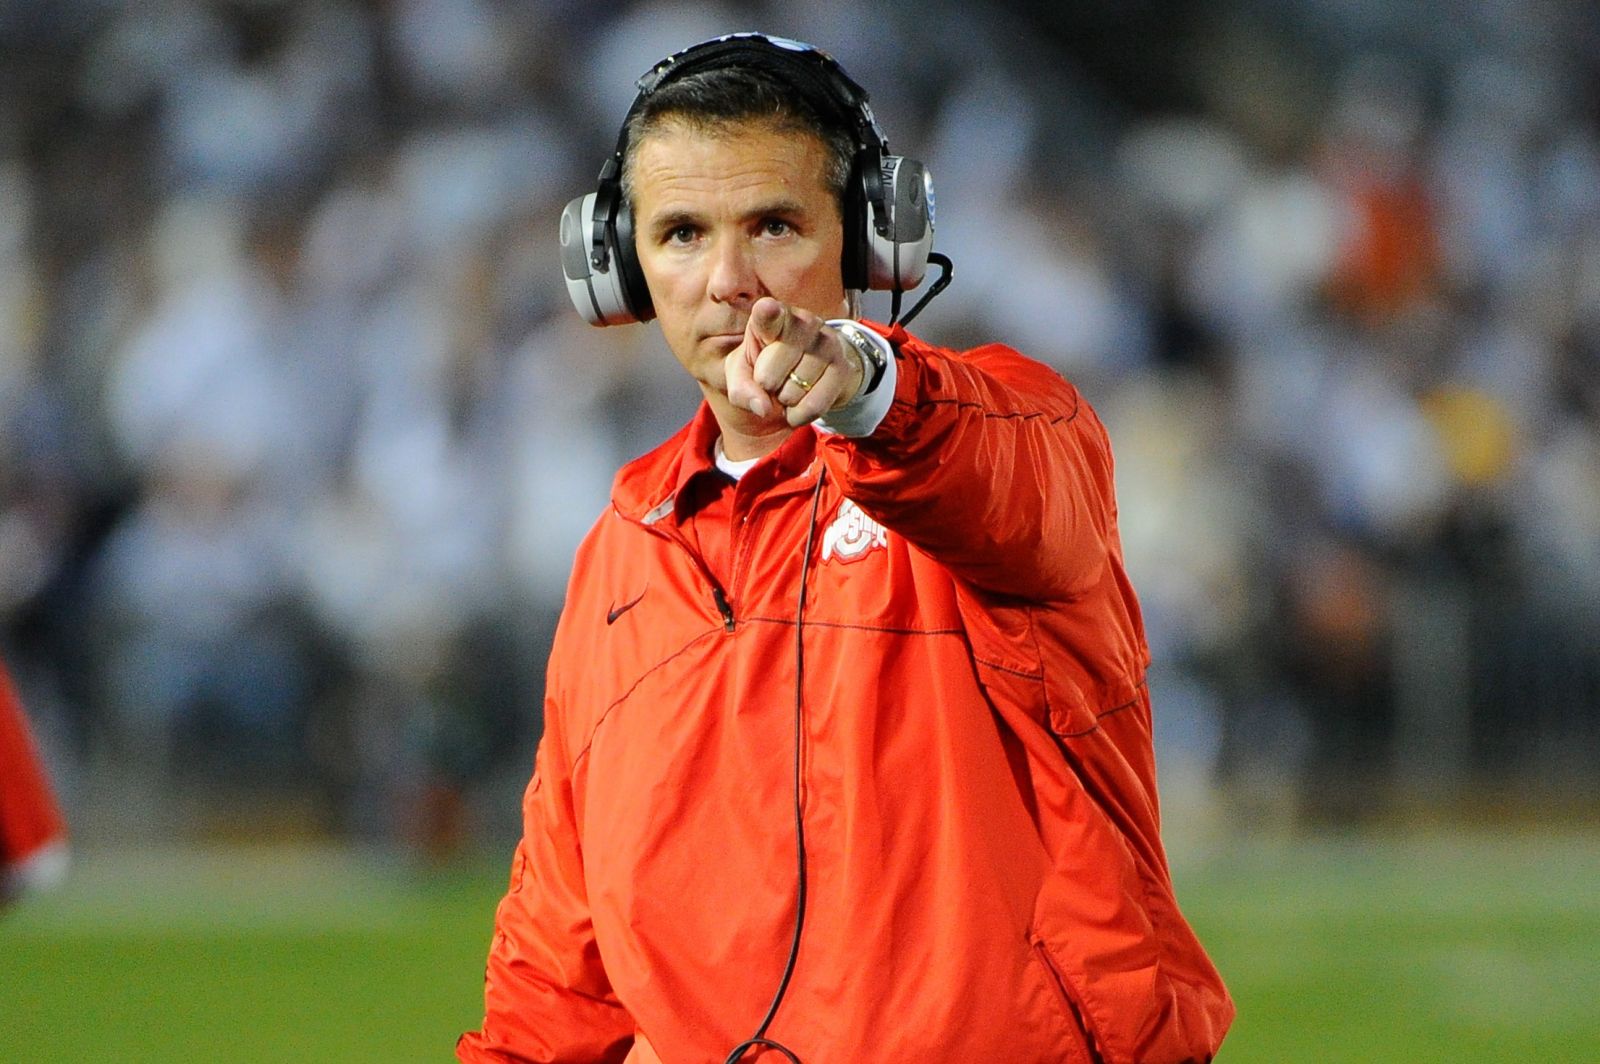 Does anyone know why Urban Meyer seems to track down a camera and then